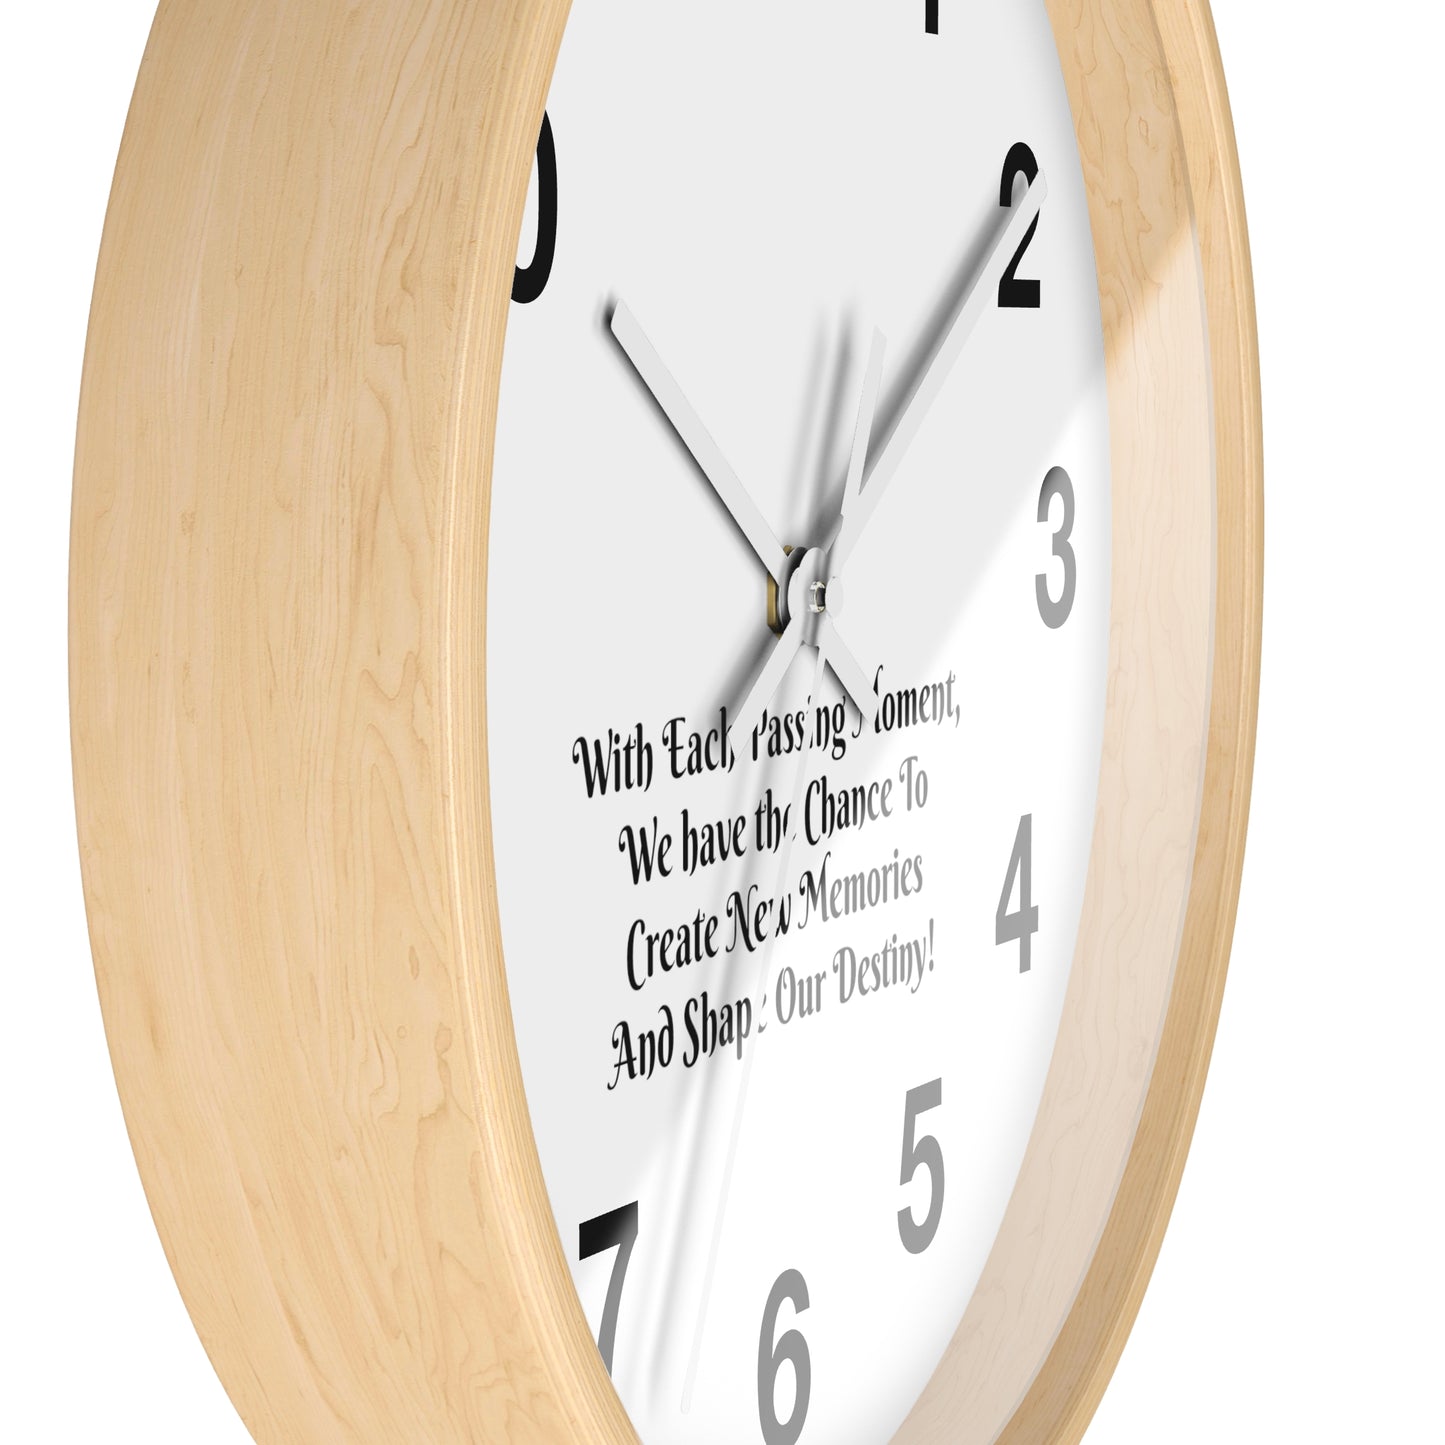 With each passing moment, we have the chance to create new memories and shape our destiny! Clock Wall Clock Home Use!!